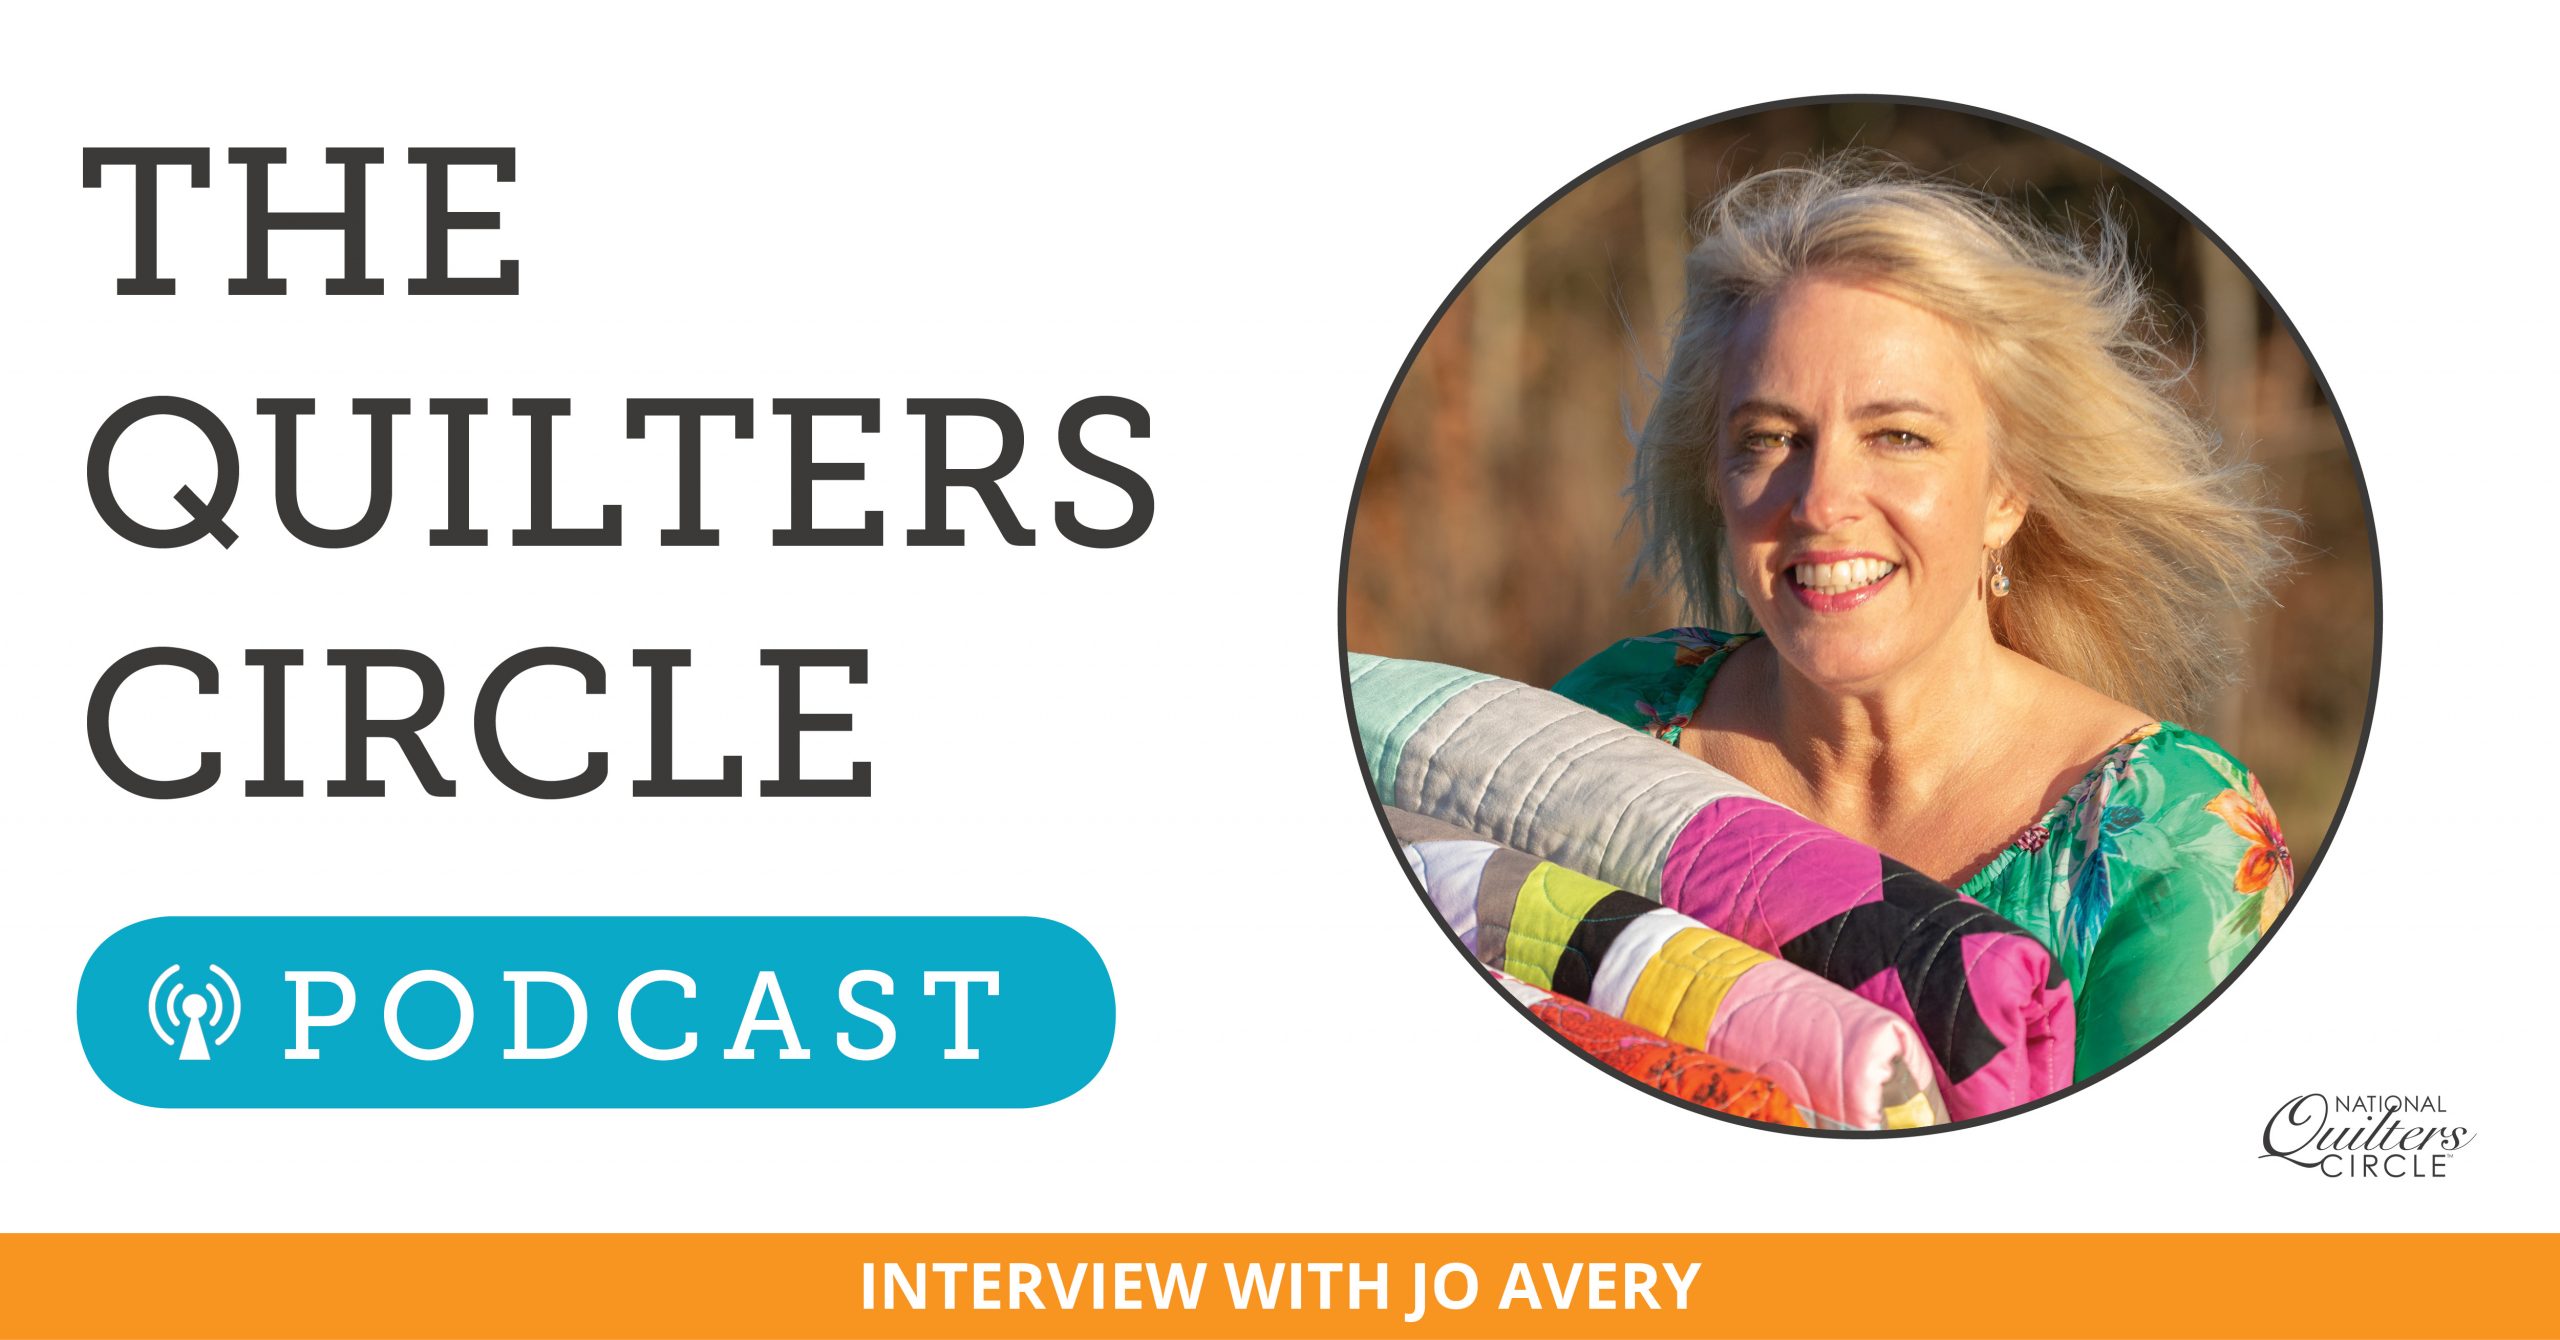 The Quilter's Circle Podcast with a woman smiling